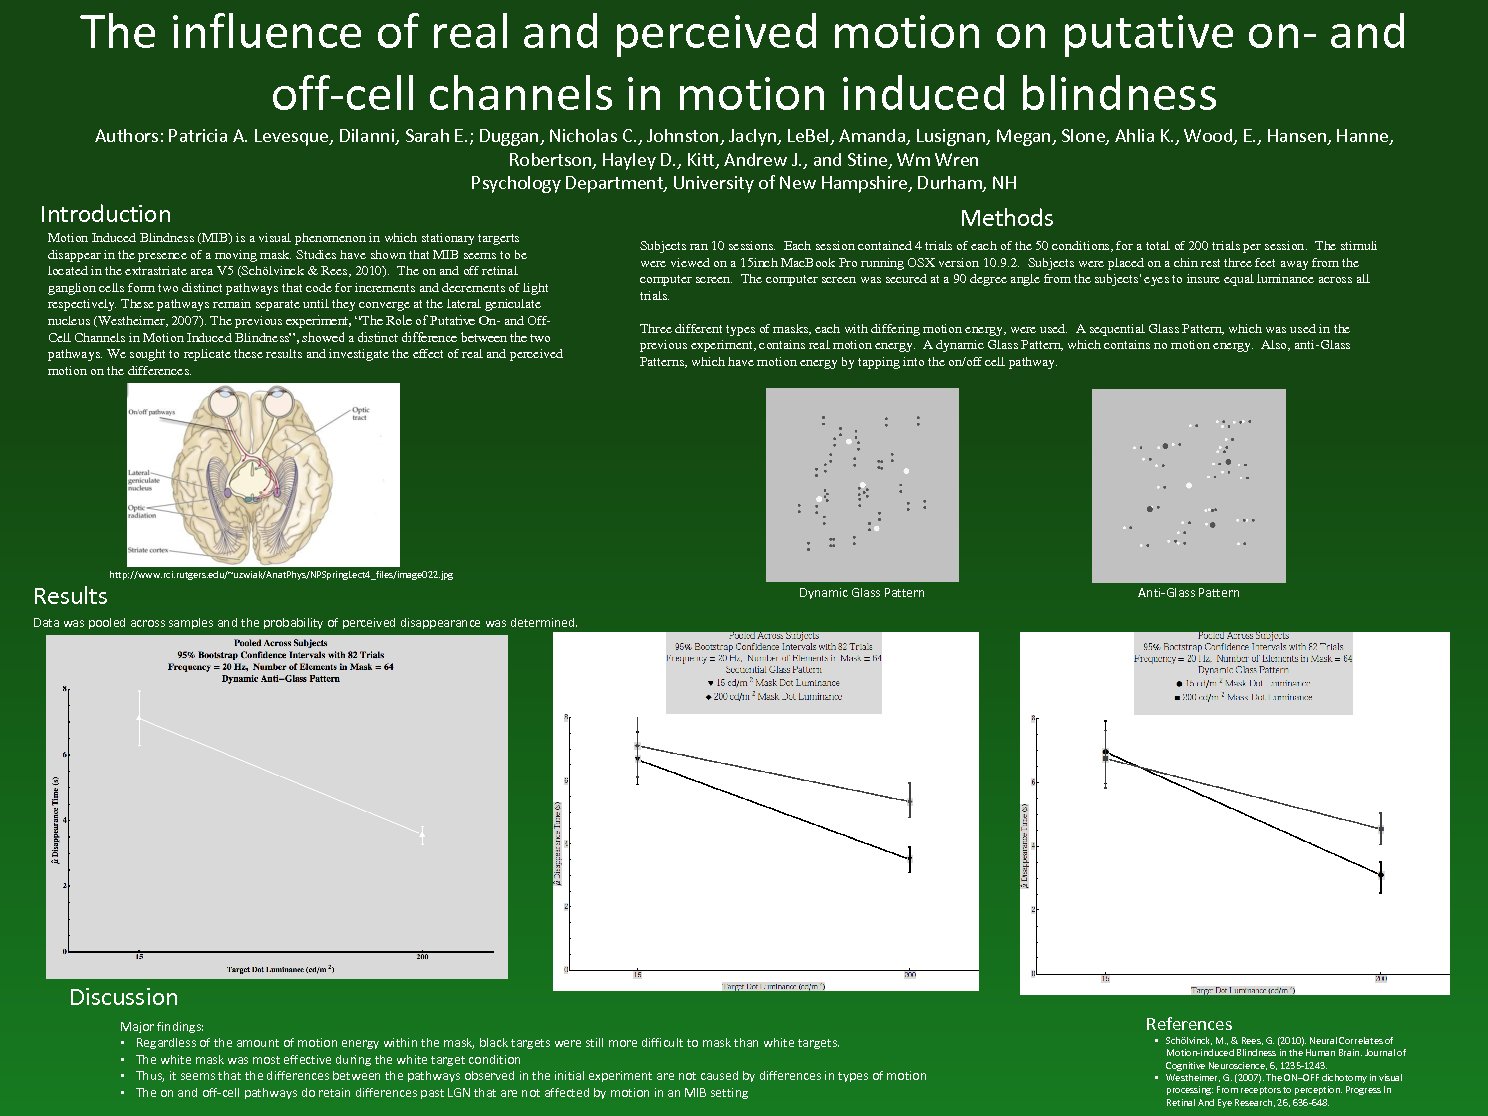 The Influence Of Real And Perceived Motion On On And Off-Cell Channels In Motion Induced Blindness by pah48